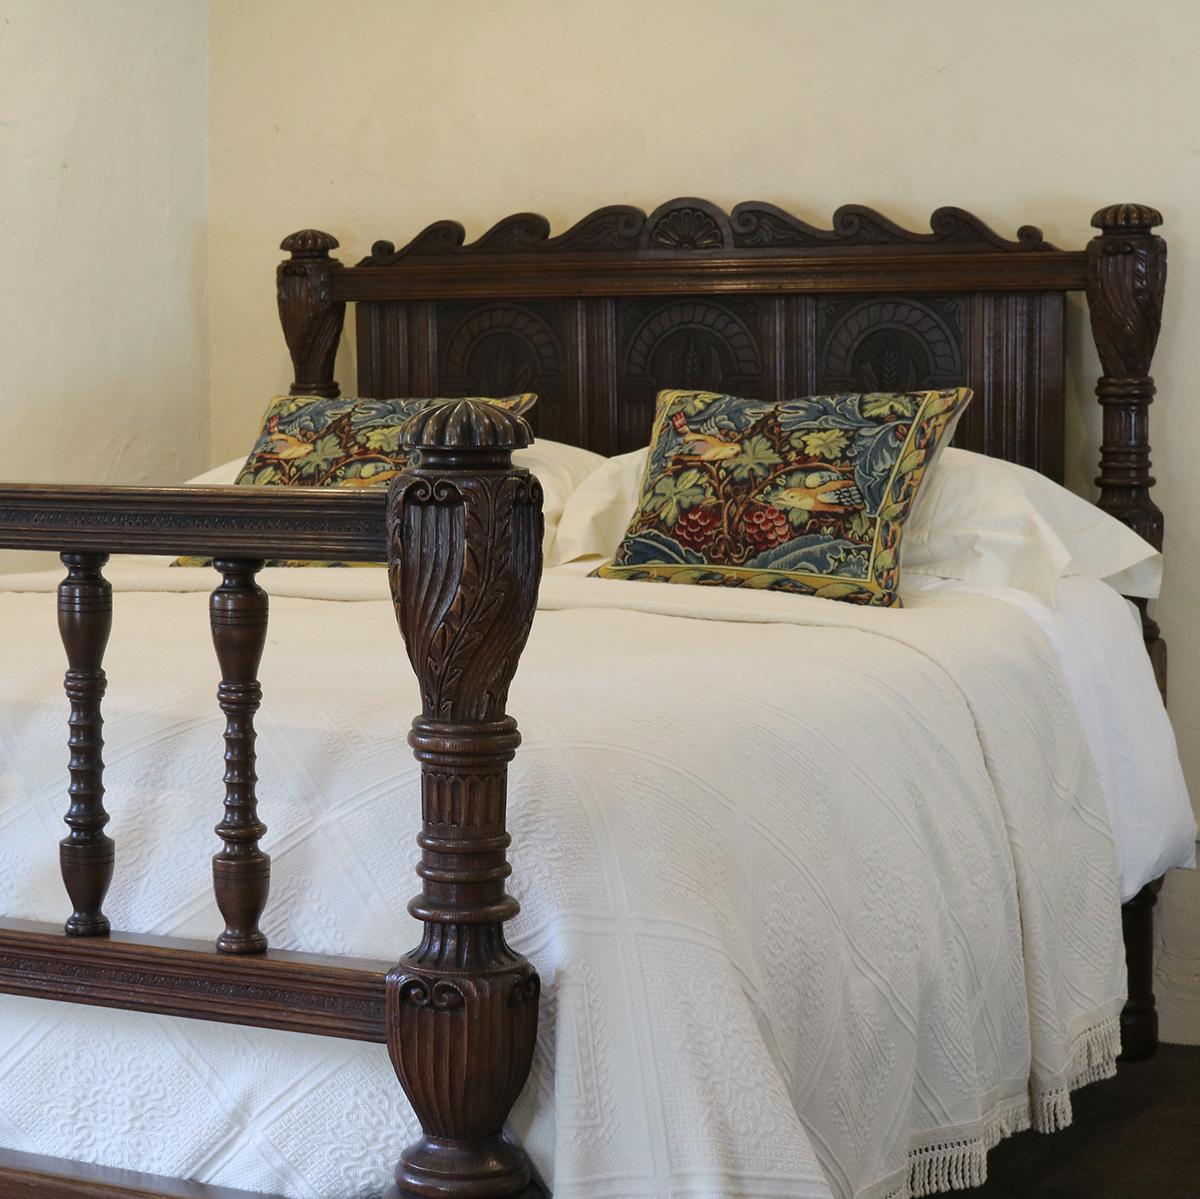 Oak country style bed with turned front posts, spindle foot board and carved head panel depicting heads of wheat.

The bed accepts a British king size or American queen size (60 inches, 5ft or 150 cm wide) base and mattress.

The price is for